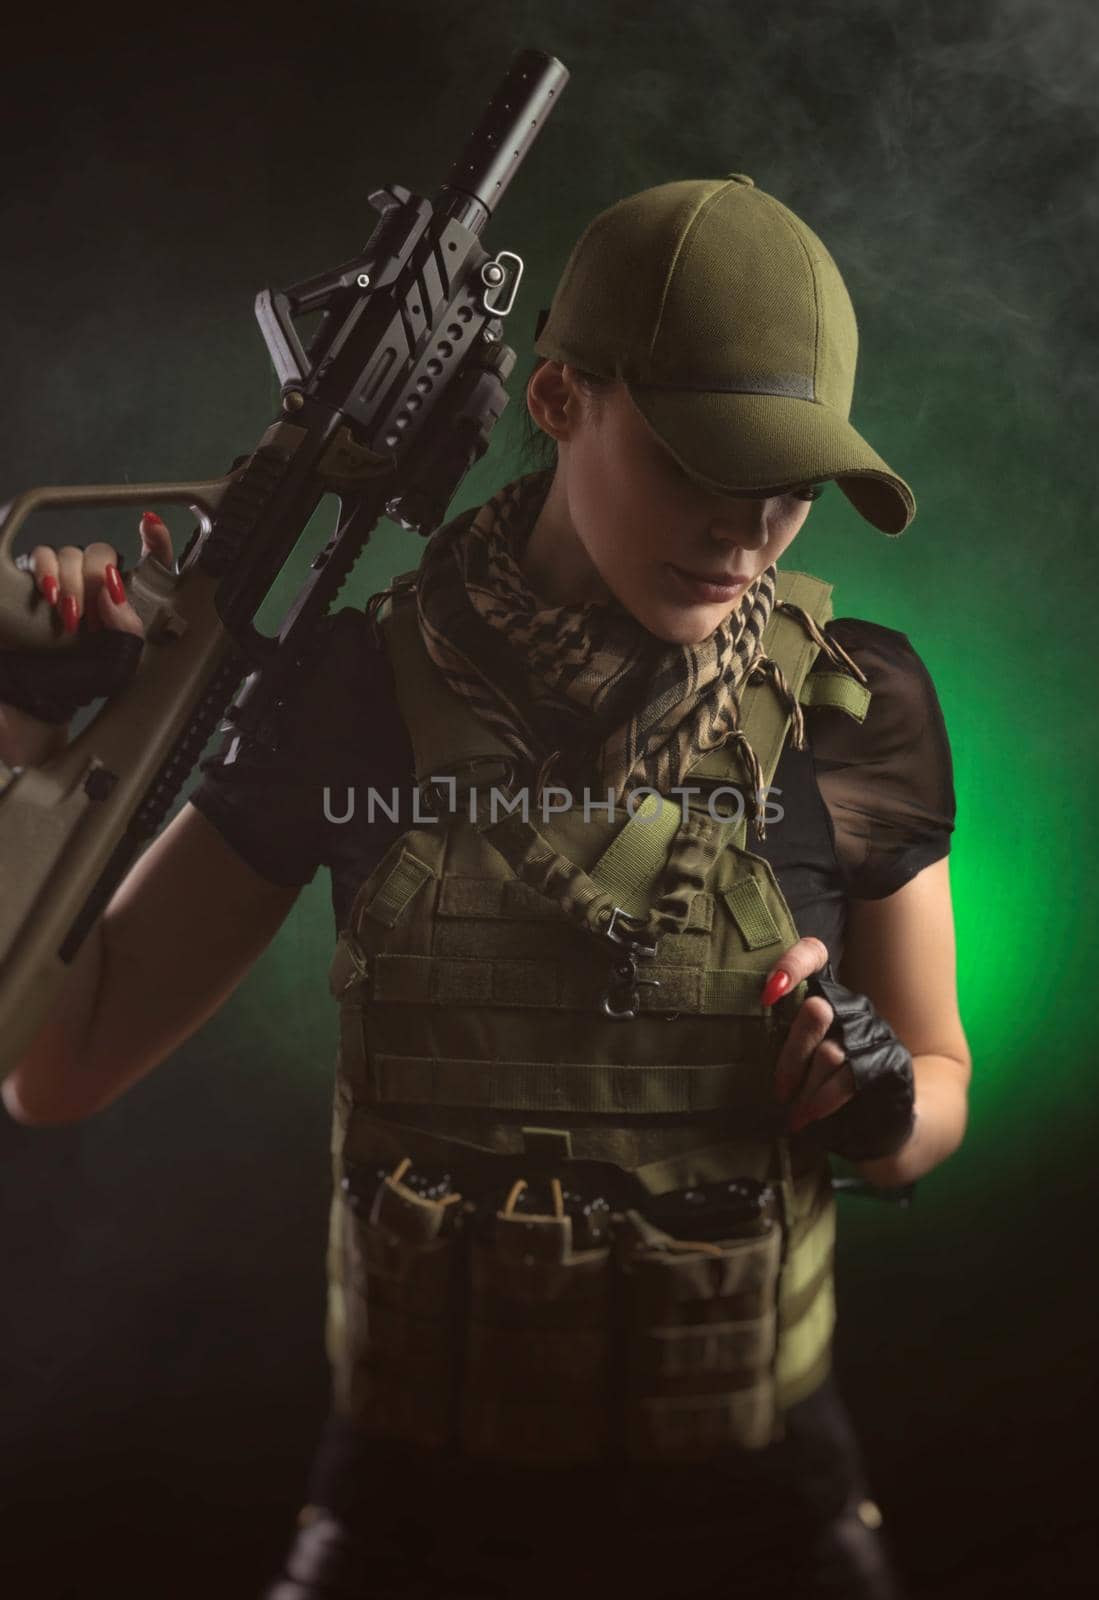 the girl in military special clothes posing with a gun in his hands on a dark background in the haze by Rotozey